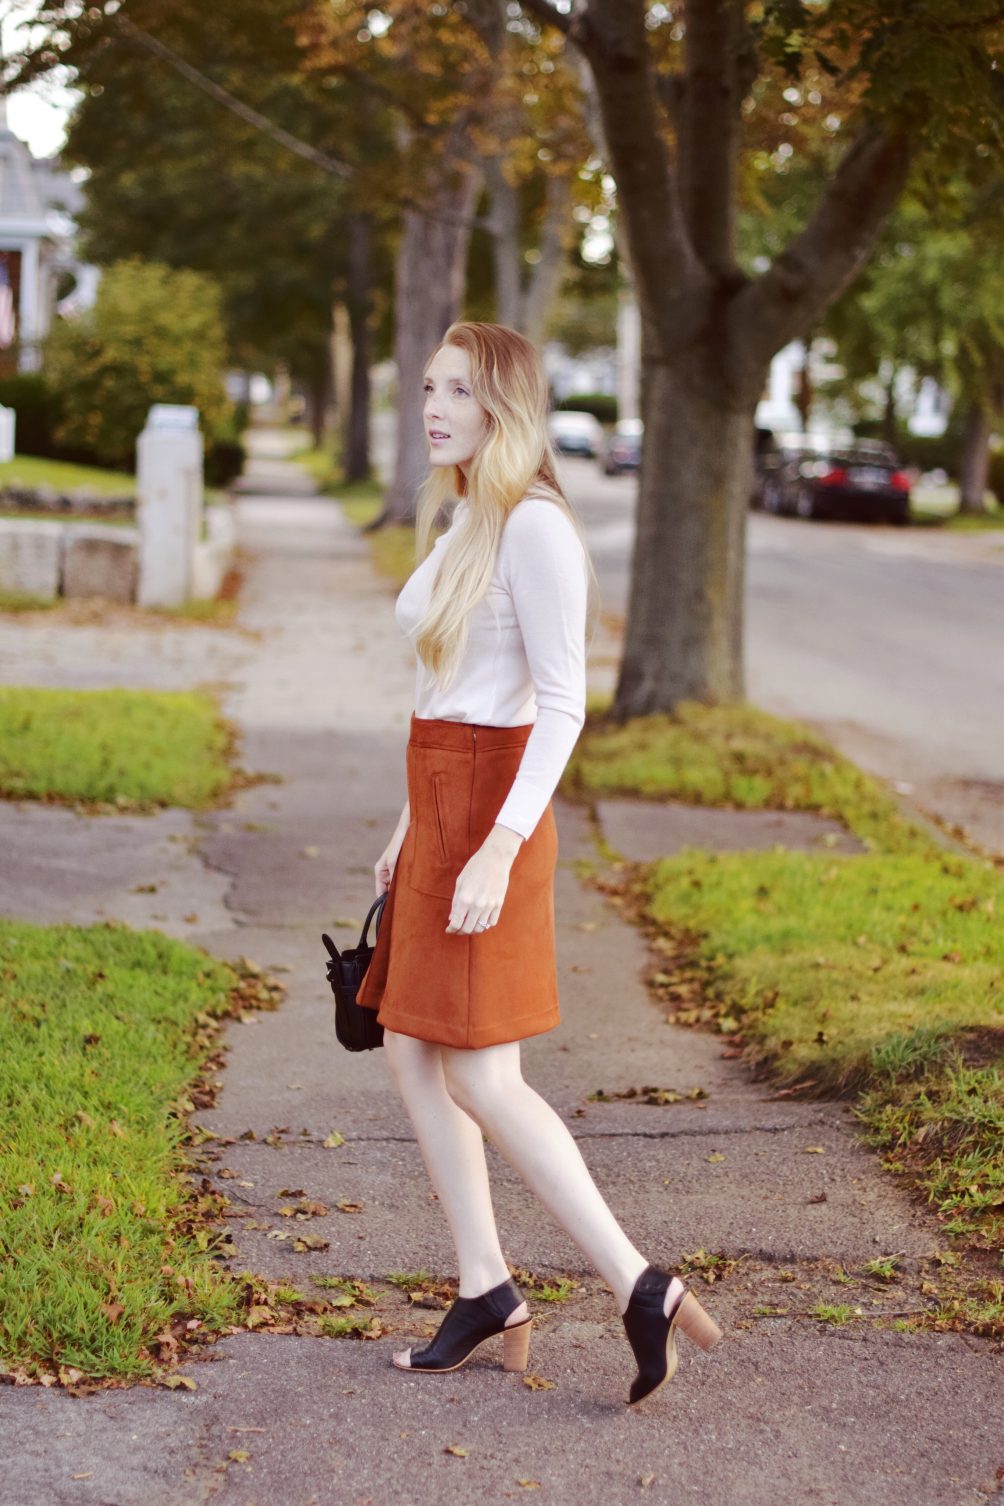 suede rust skirt on leslie musser with Club Monaco pink embroidered sweater and Coach appliqué bag for fall style outfit